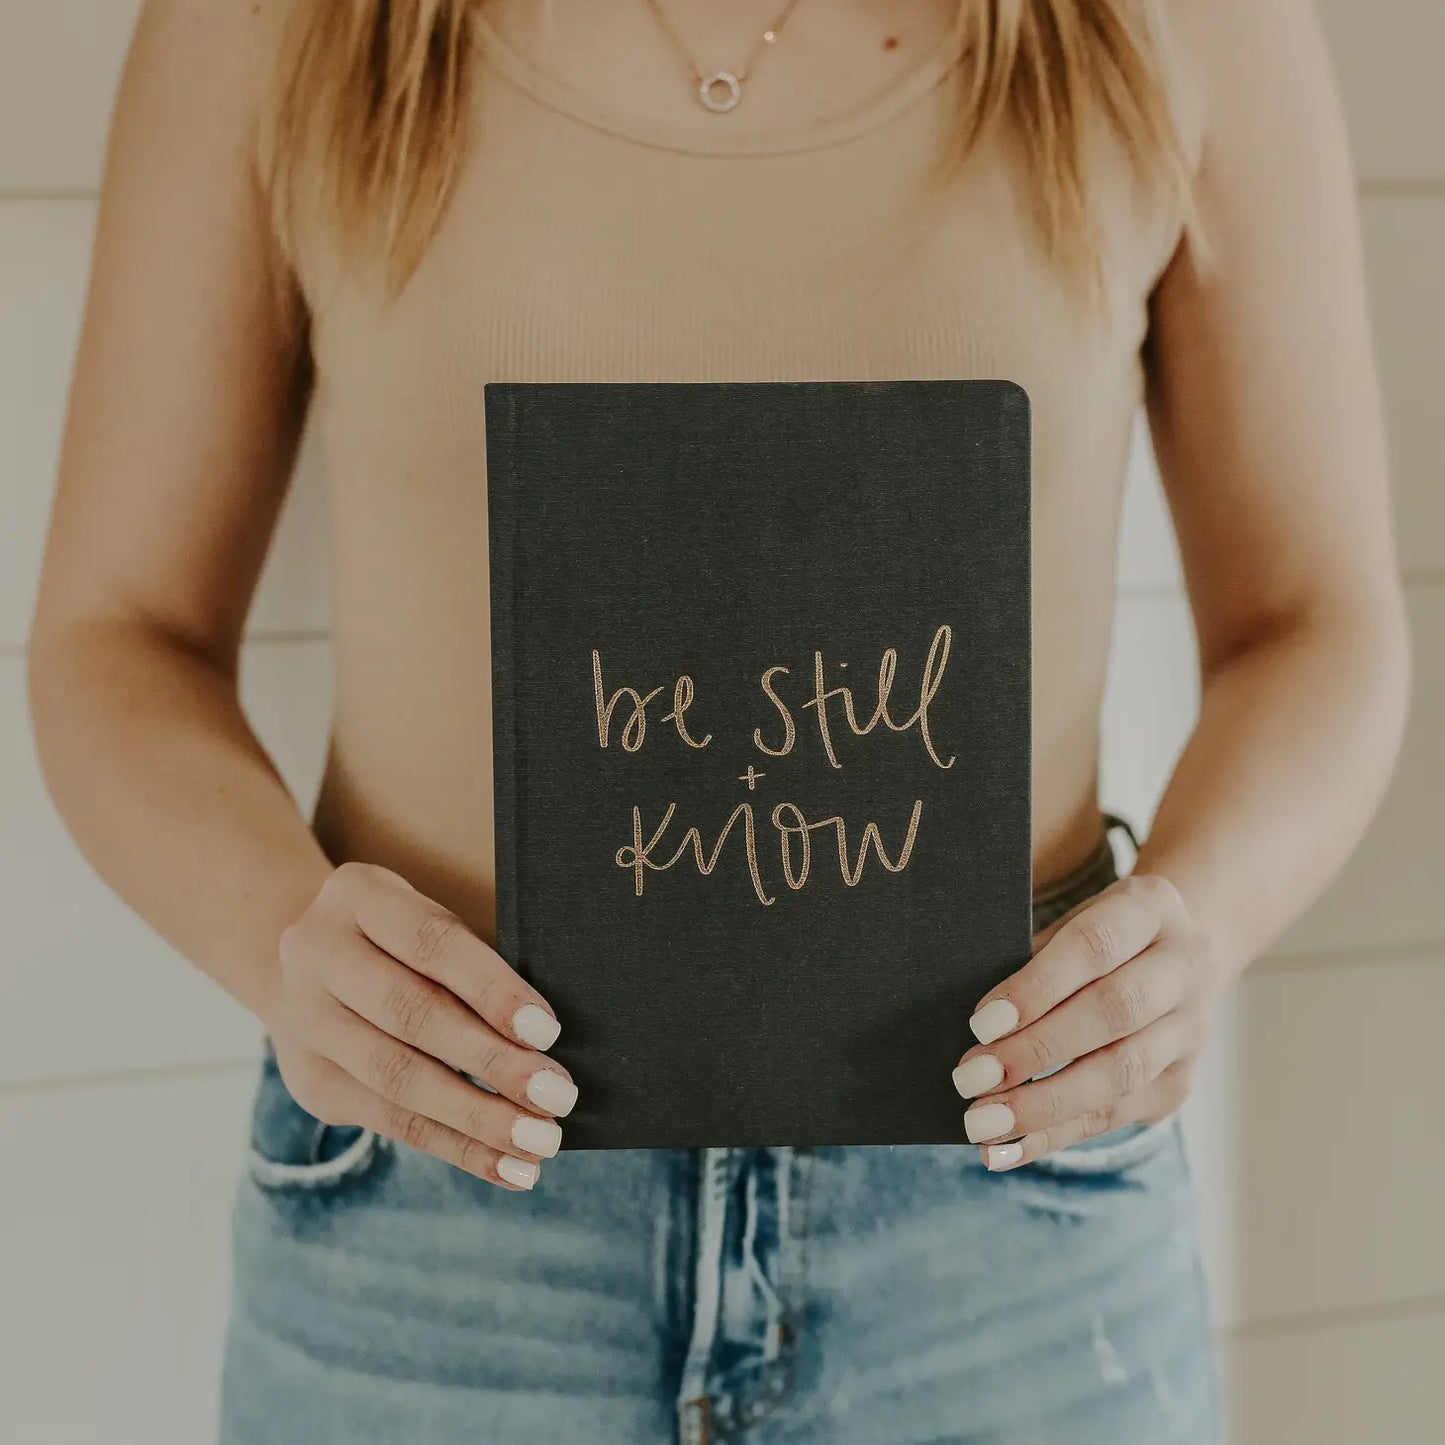 Be Still and Know - Grey and Gold Foil Fabric Journal